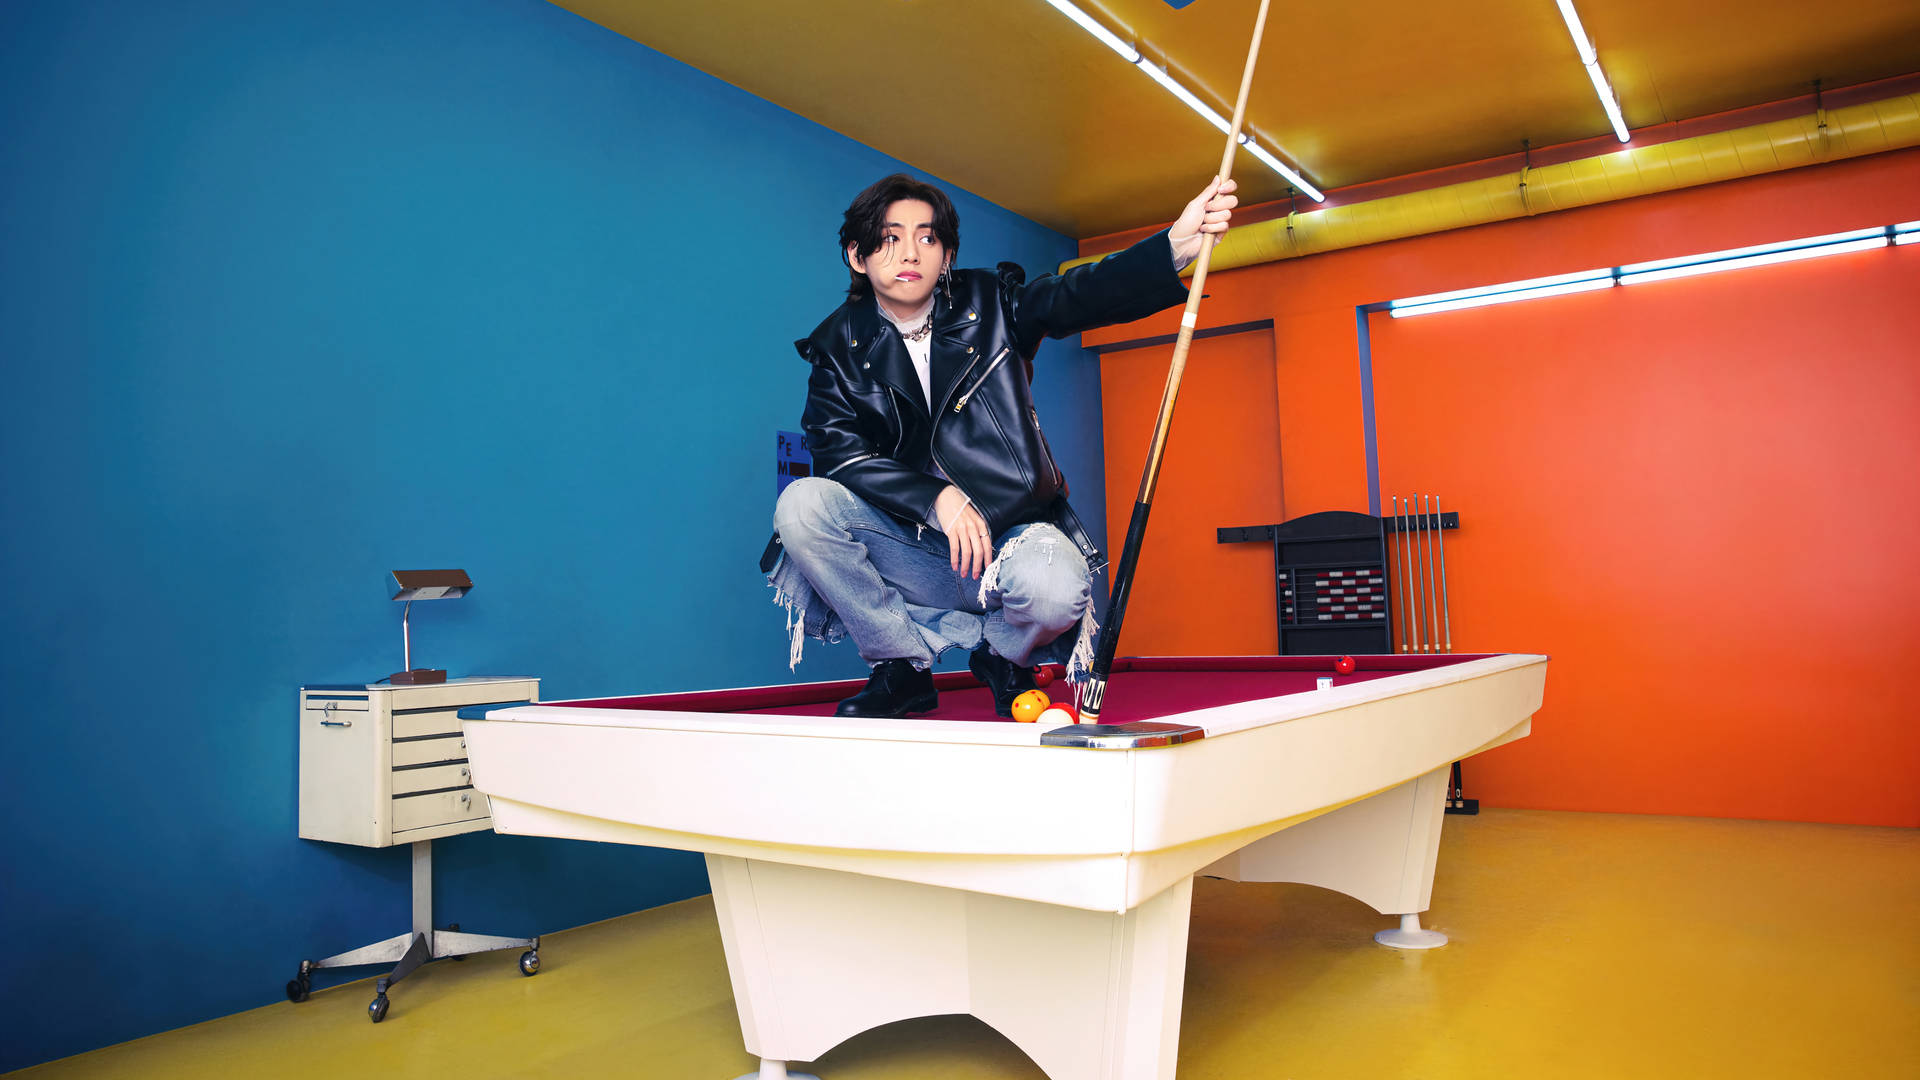 BTS Tae Hyung On Billiards Table Wallpaper